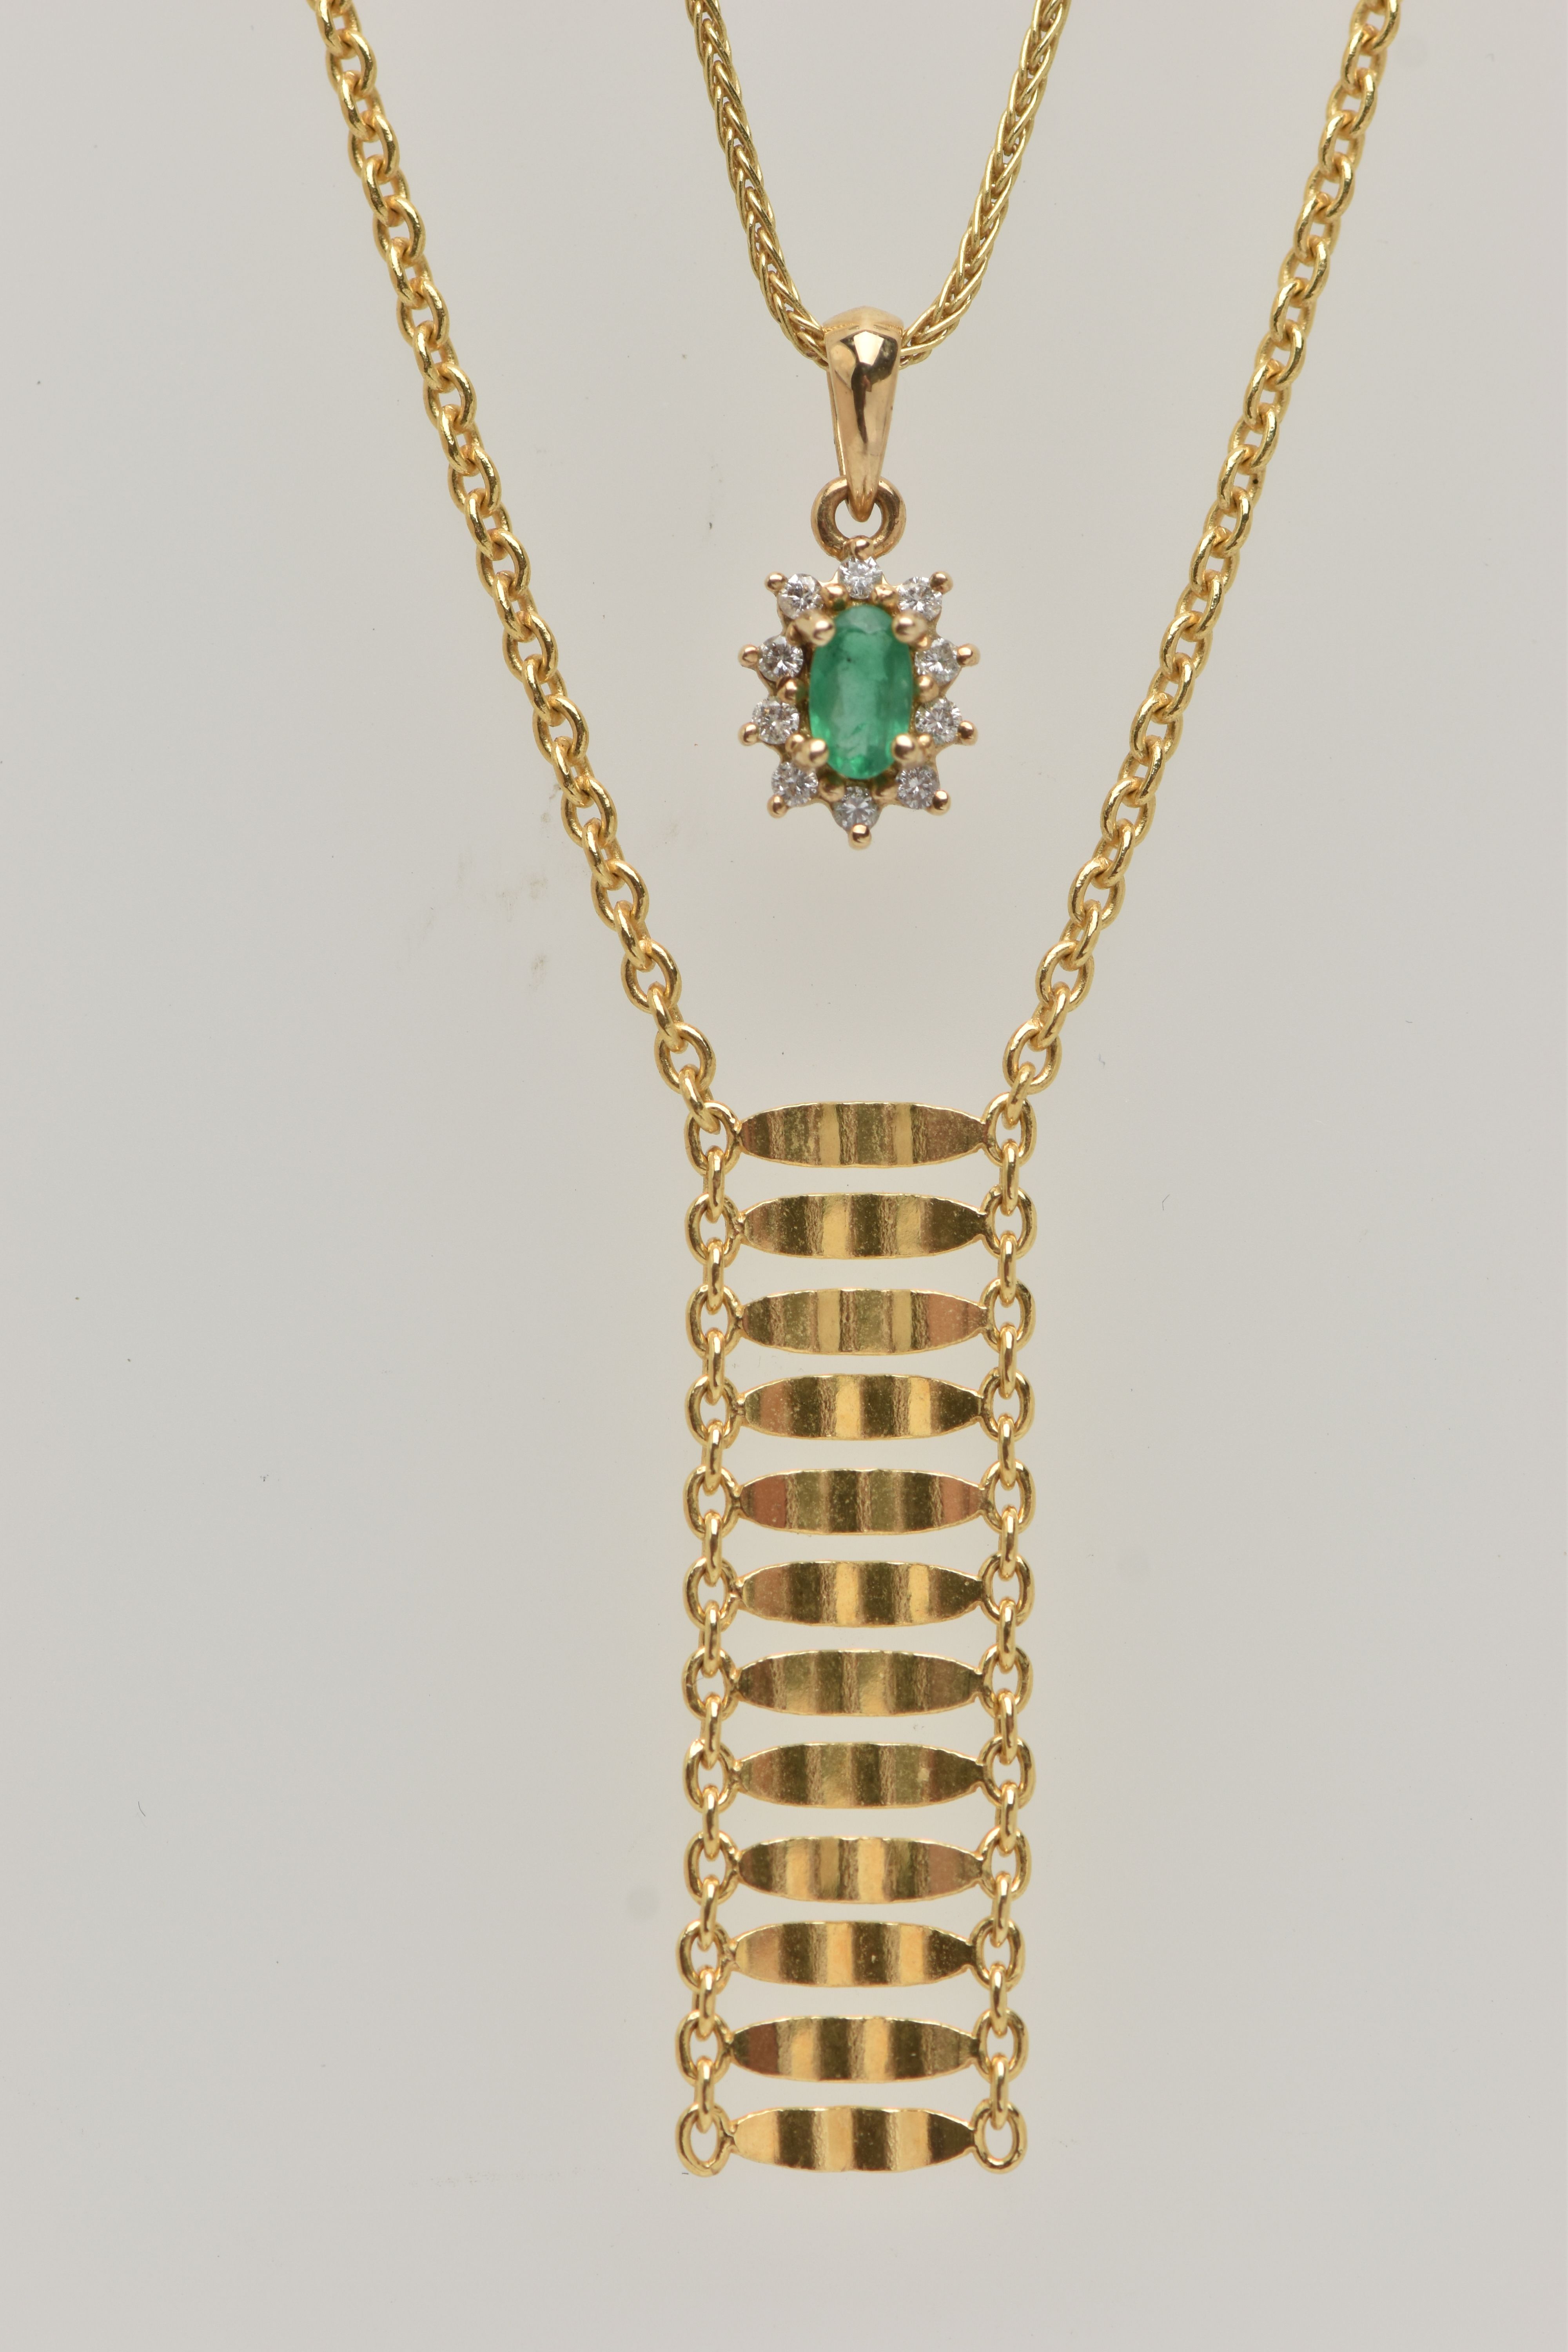 TWO 9CT GOLD PENDANT NECKLACES, the first with a textured style pendant fixed to a Rolo link chain - Image 2 of 5